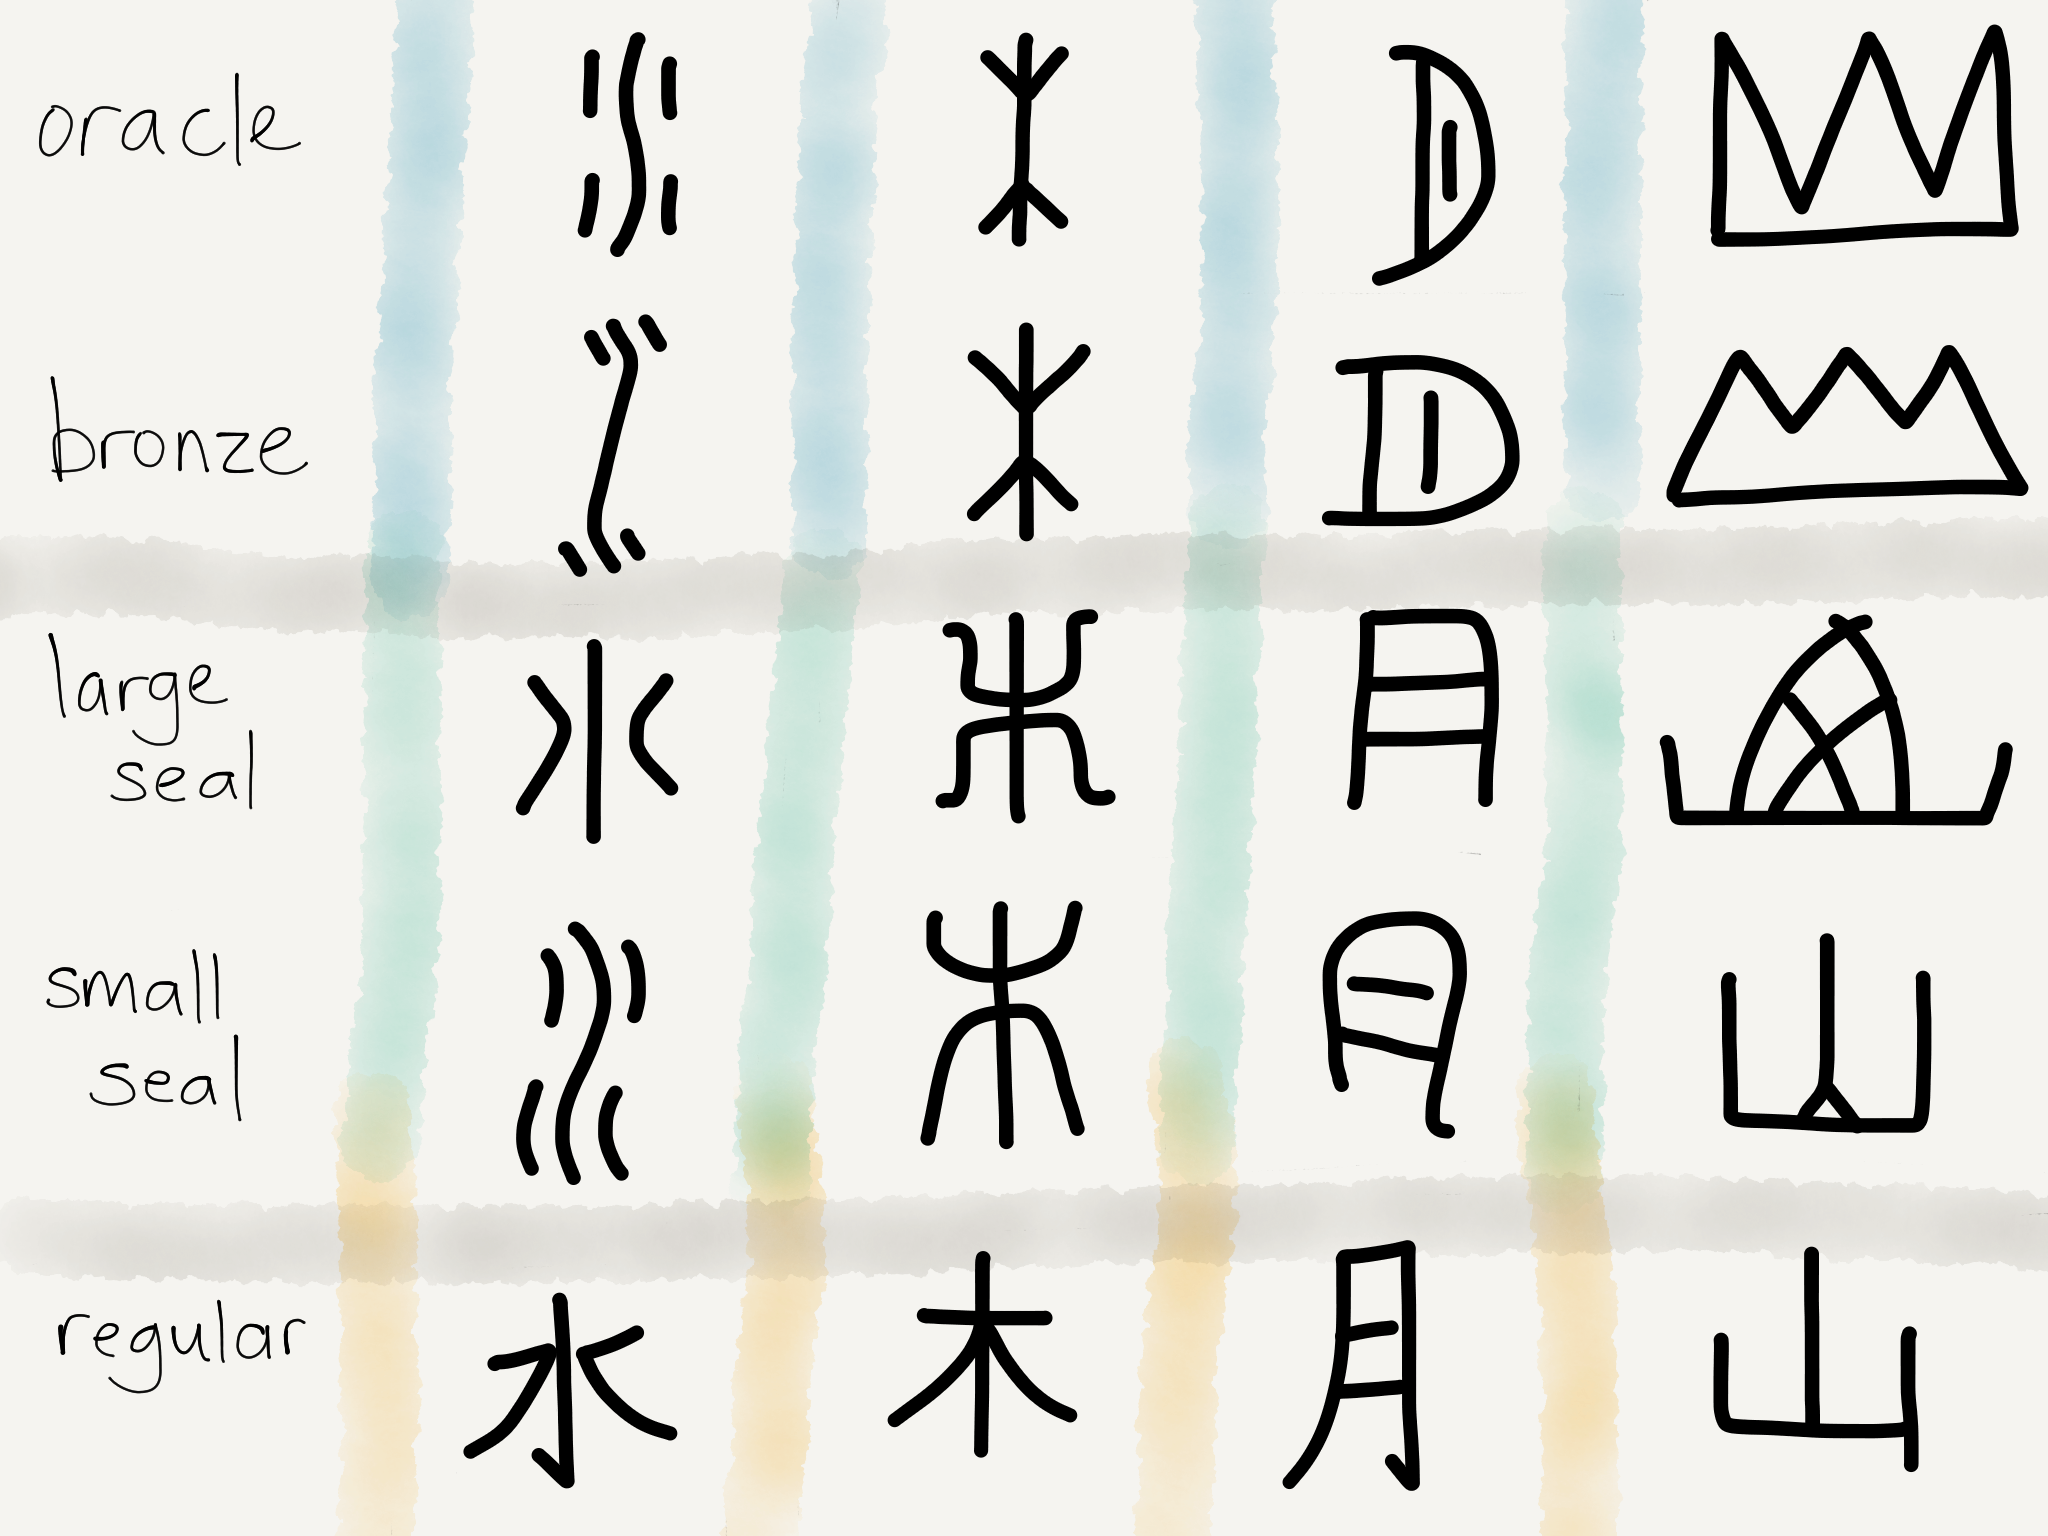 EC Writing Systems Chinese Logogram Evolution.PNG